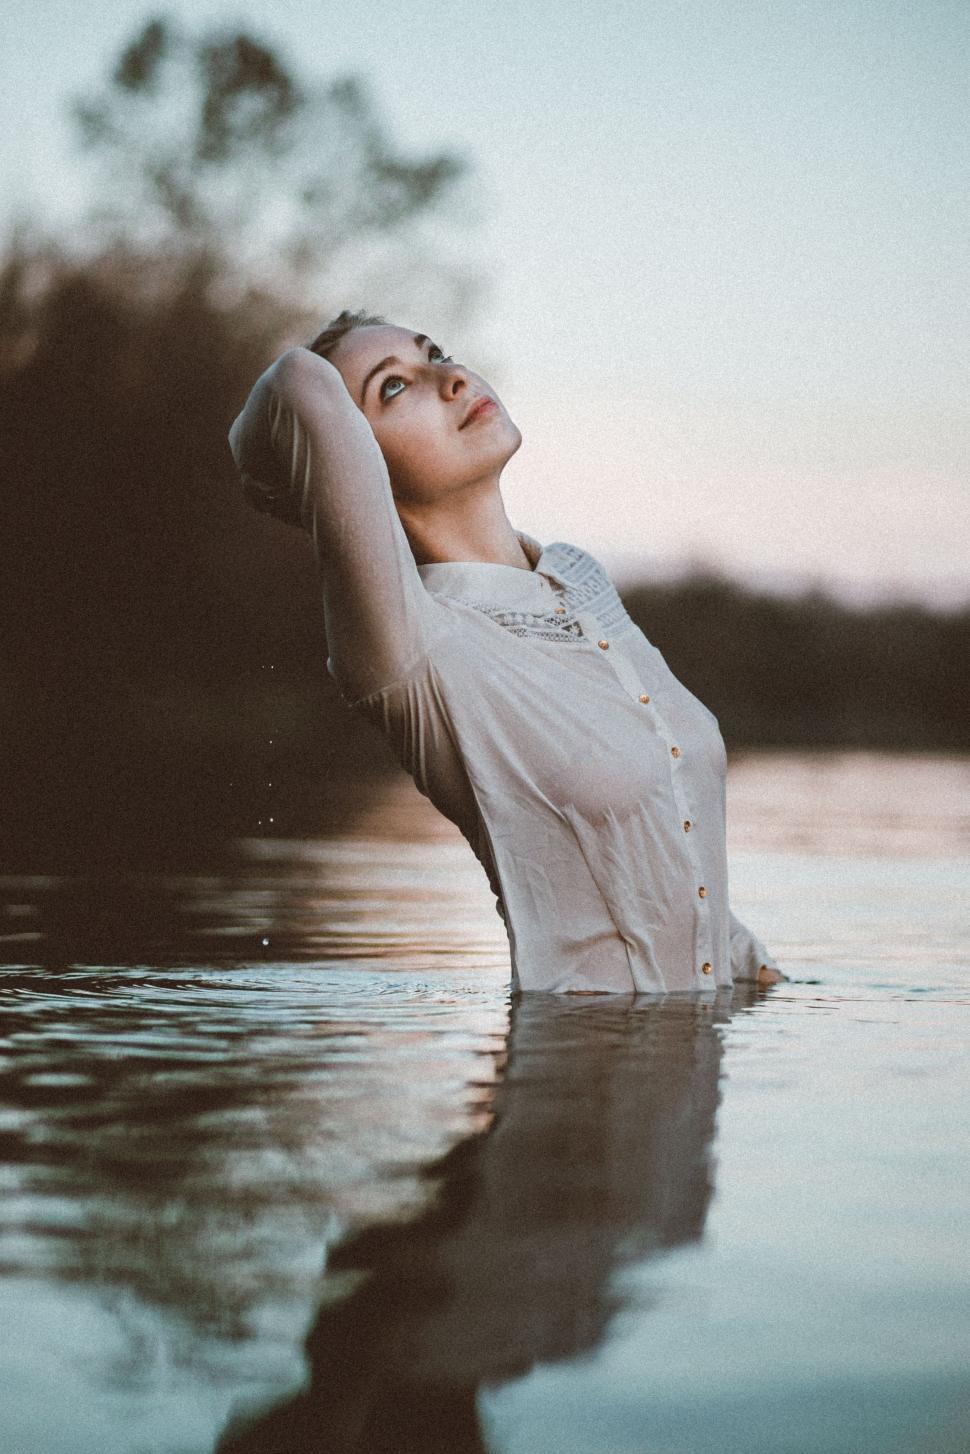 Free Image of Woman Floating in Body of Water 